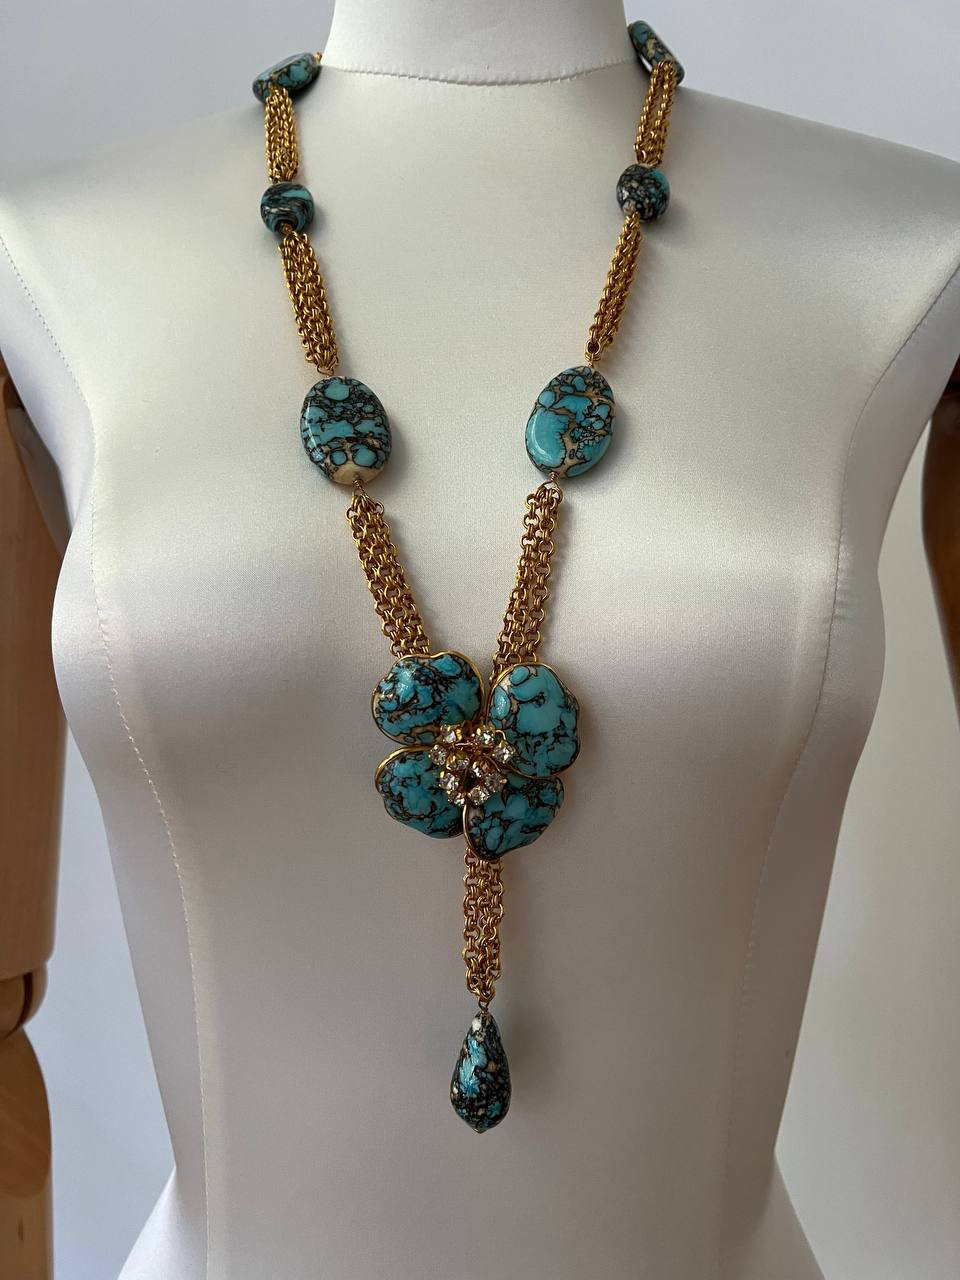 Coco Chanel Gripoix Turquoise Necklace Earrings Set  Turquoise necklace,  Necklace earring set, Chanel necklace